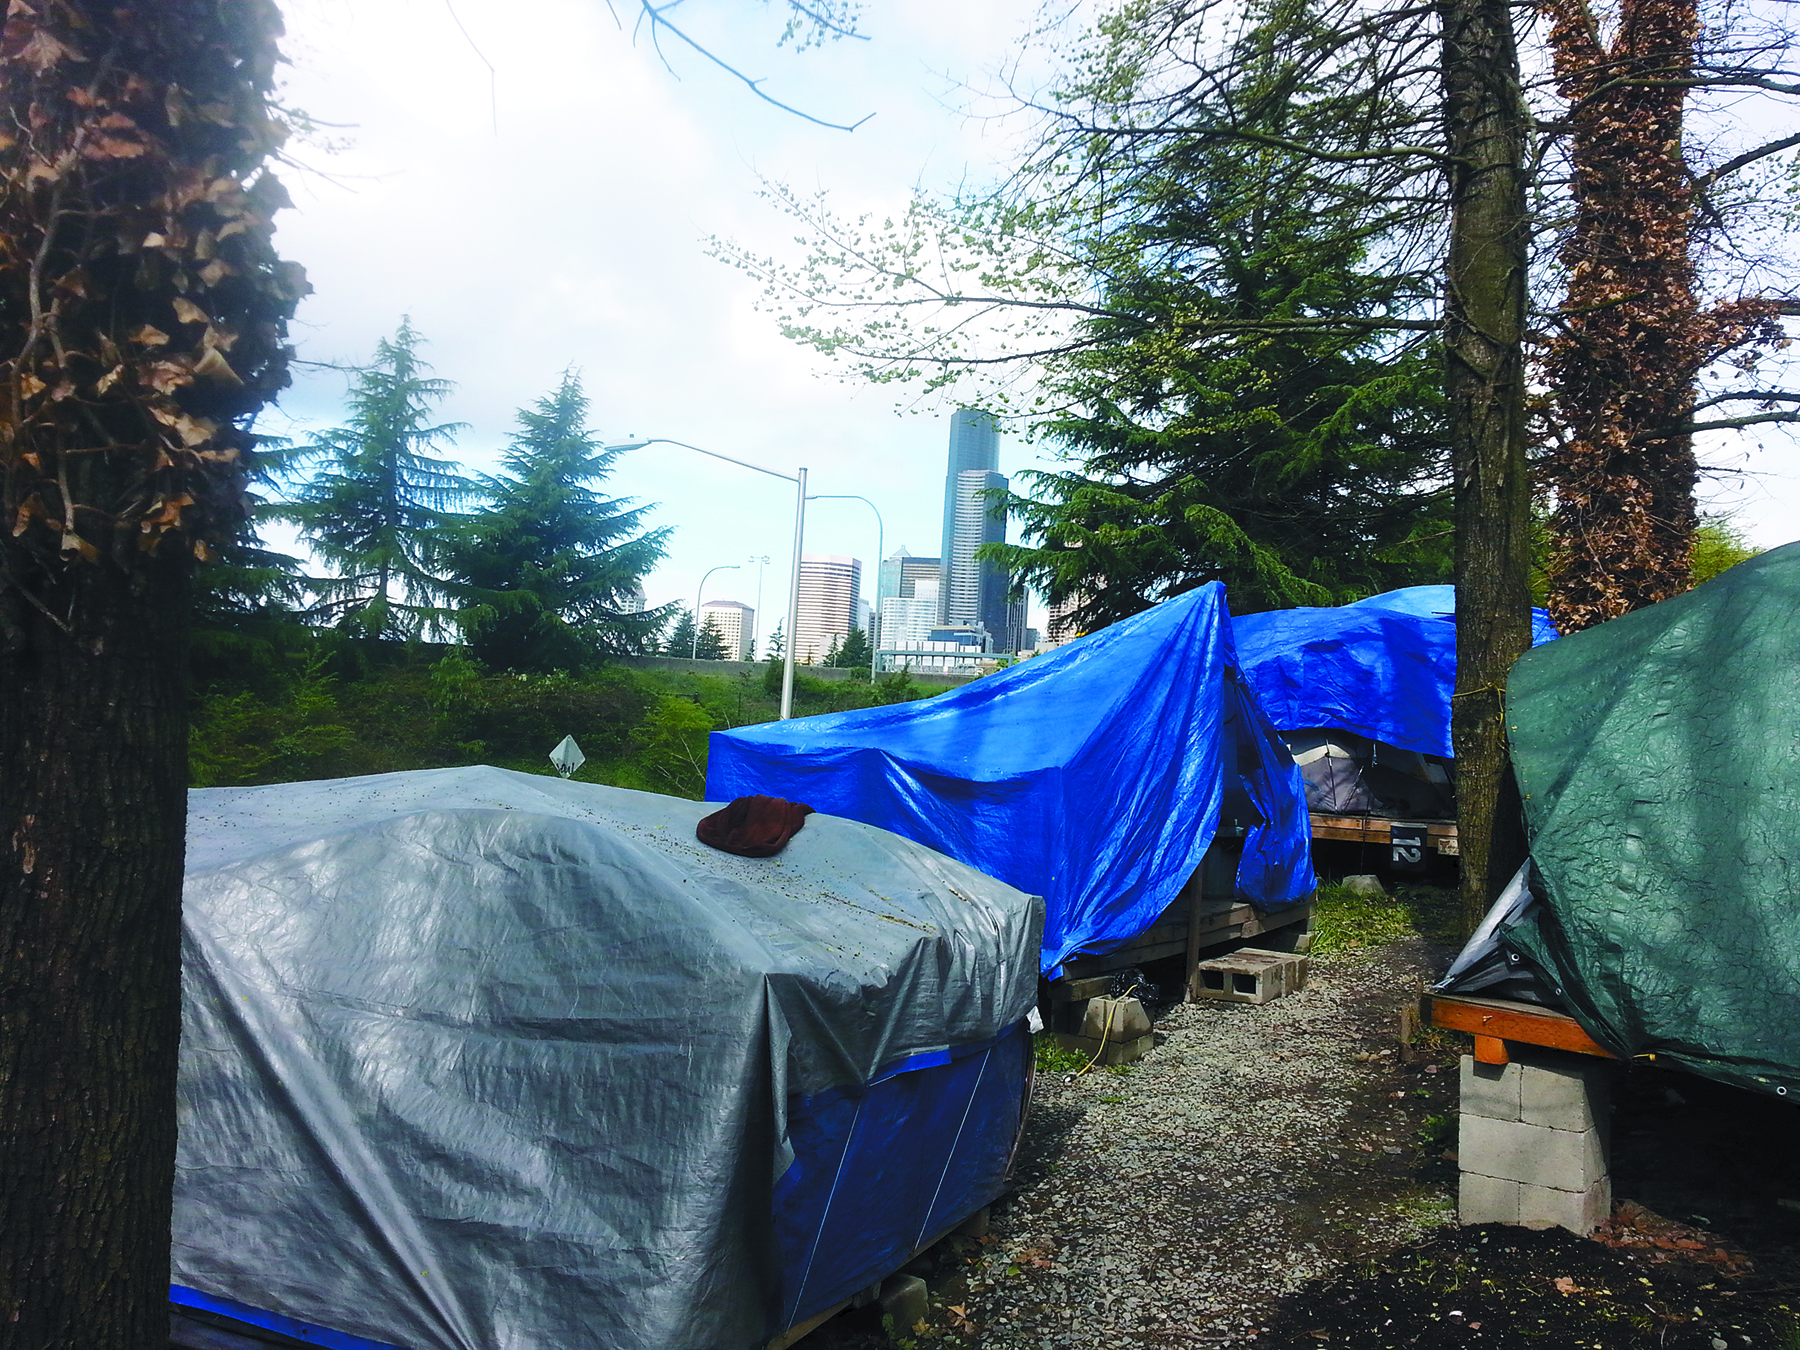 Nickelsville is the city’s only formal tent city, but not for long.